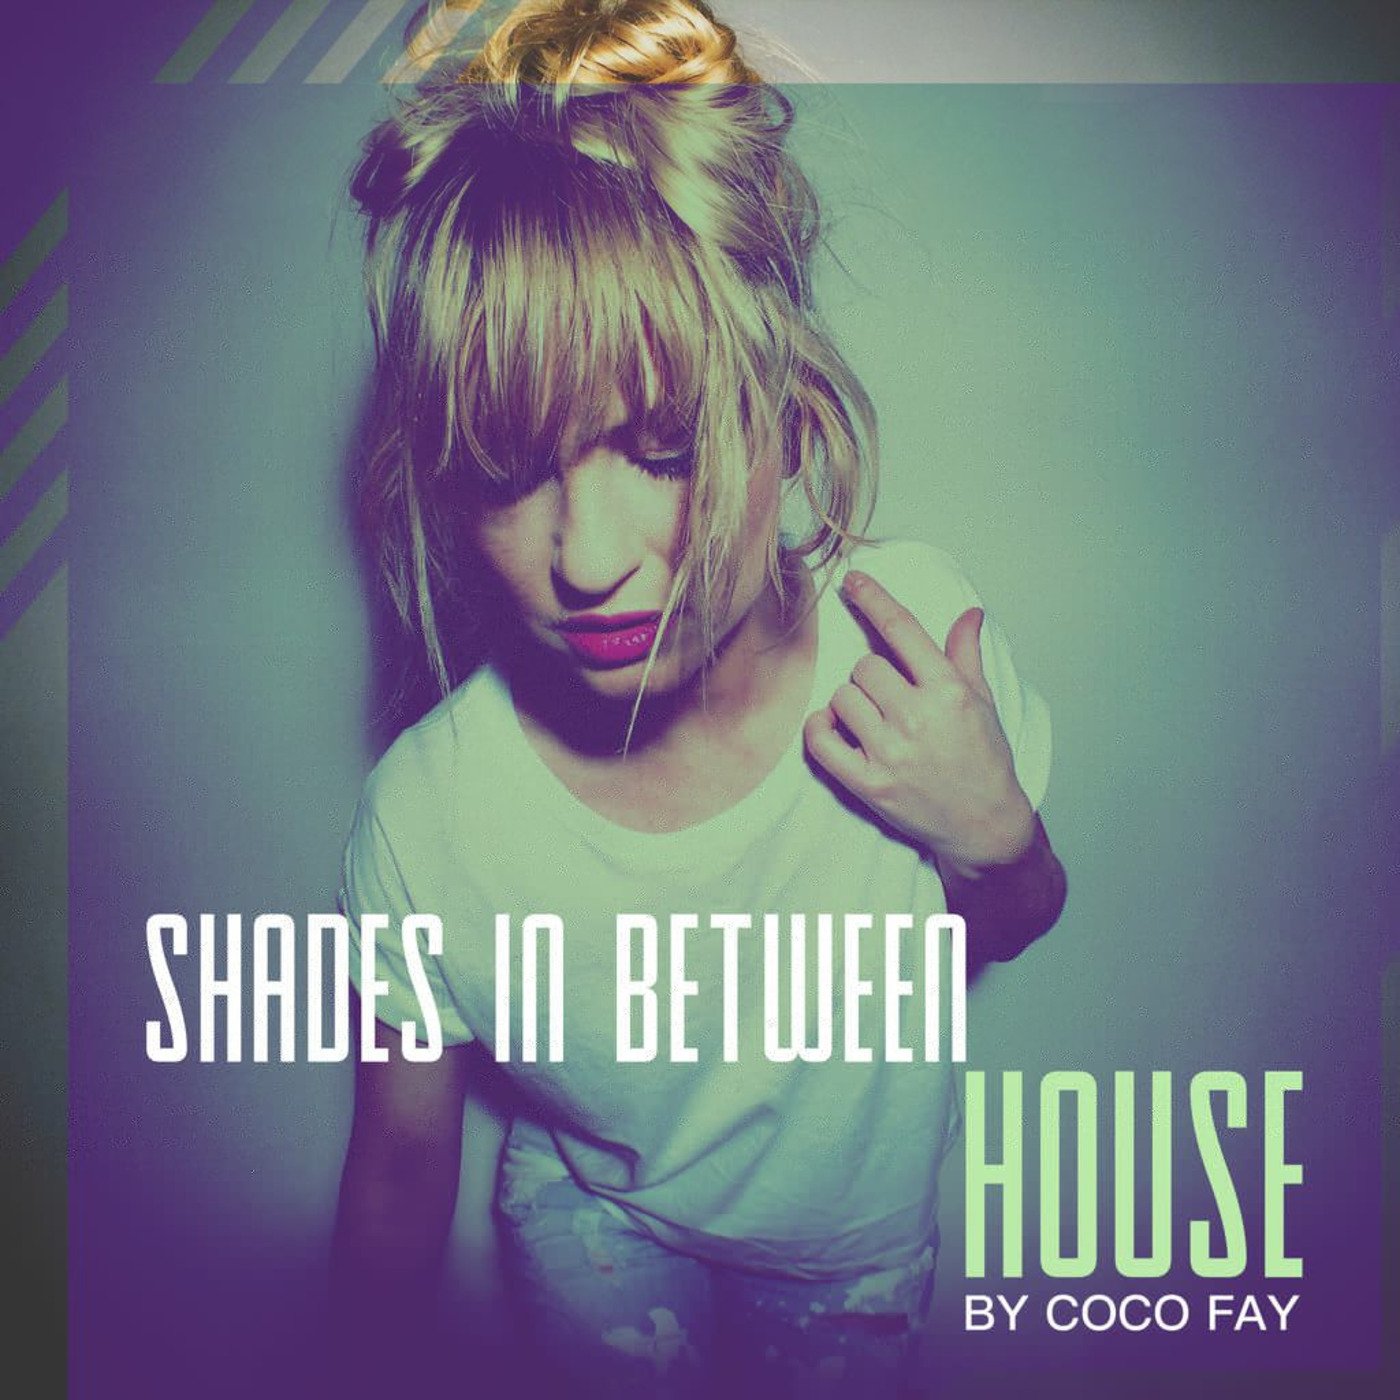 Shades of House #013 by Coco Fay